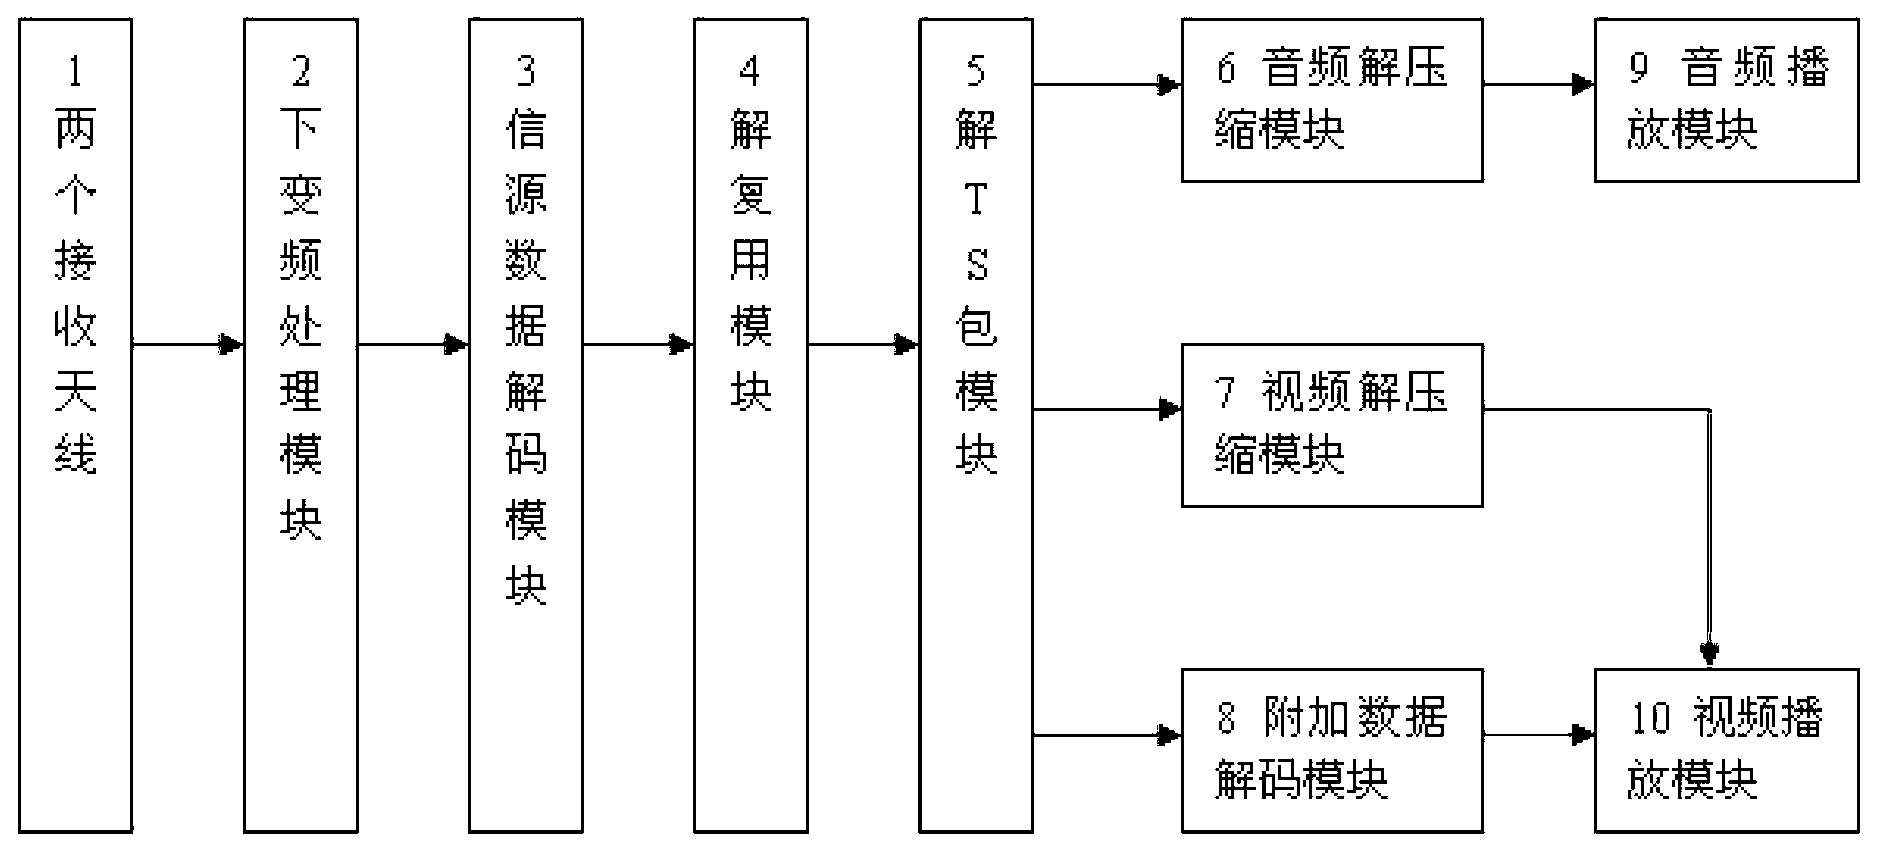 Vehicle-mounted MIMO (multiple-input and multiple-output) type DVB-T (digital video broadcasting-terrestrial) receiver